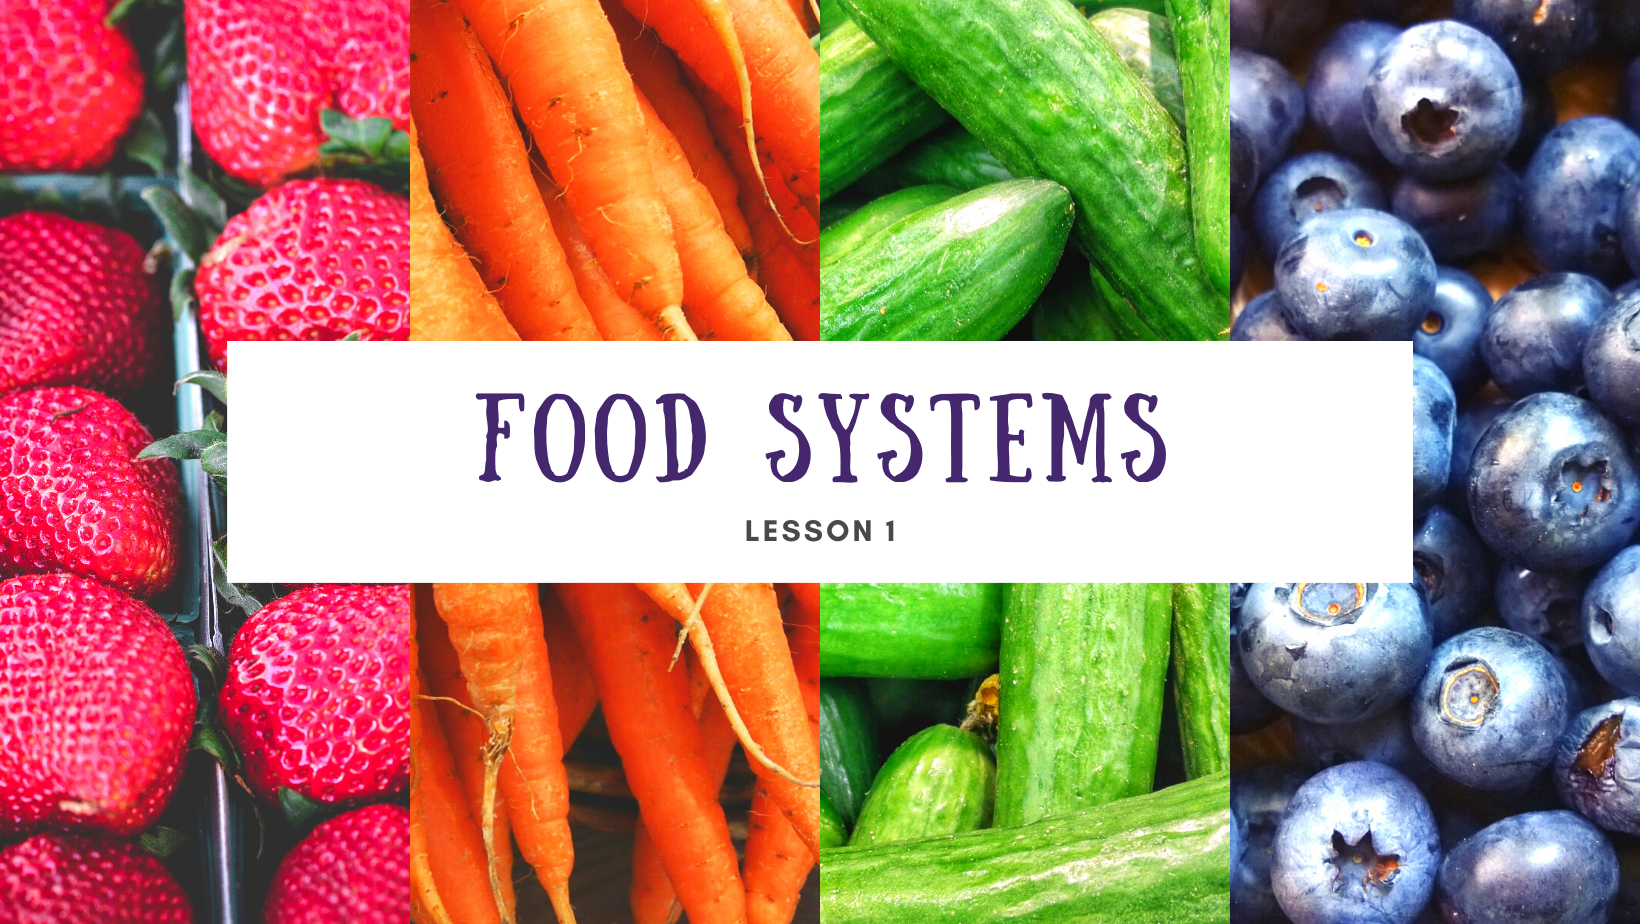 Lesson 1: Food systems